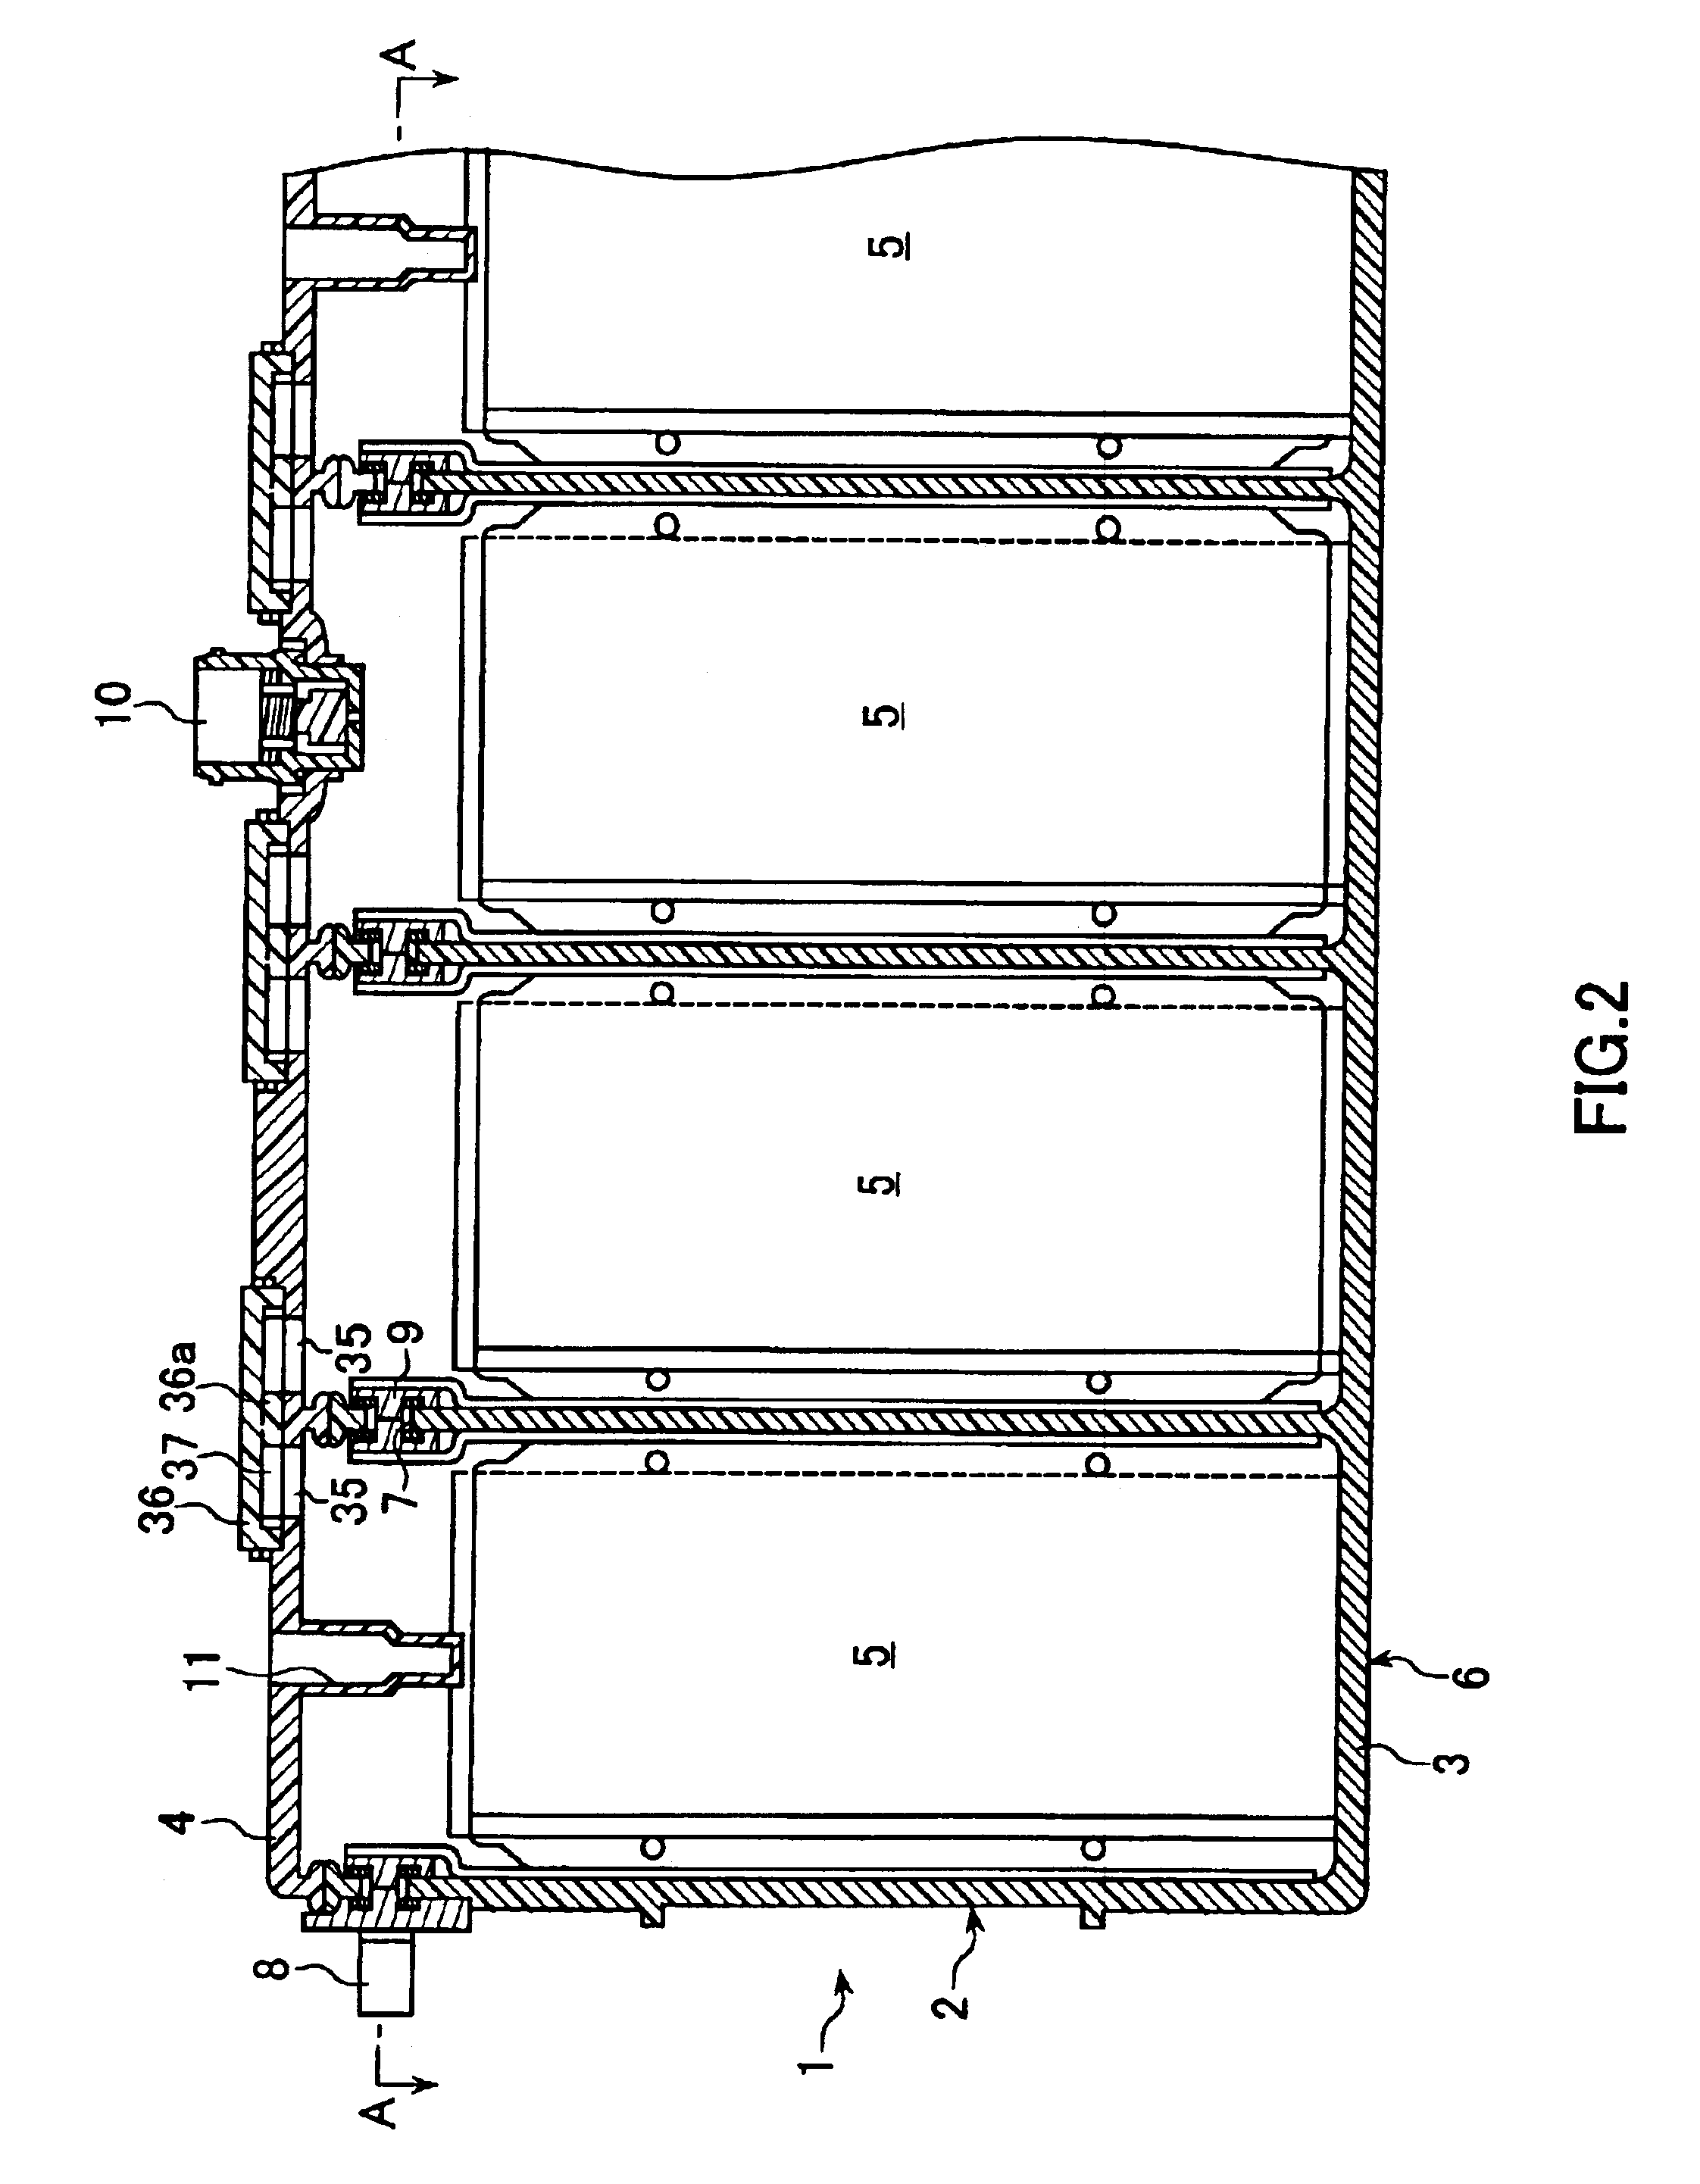 Method for recycling battery pack